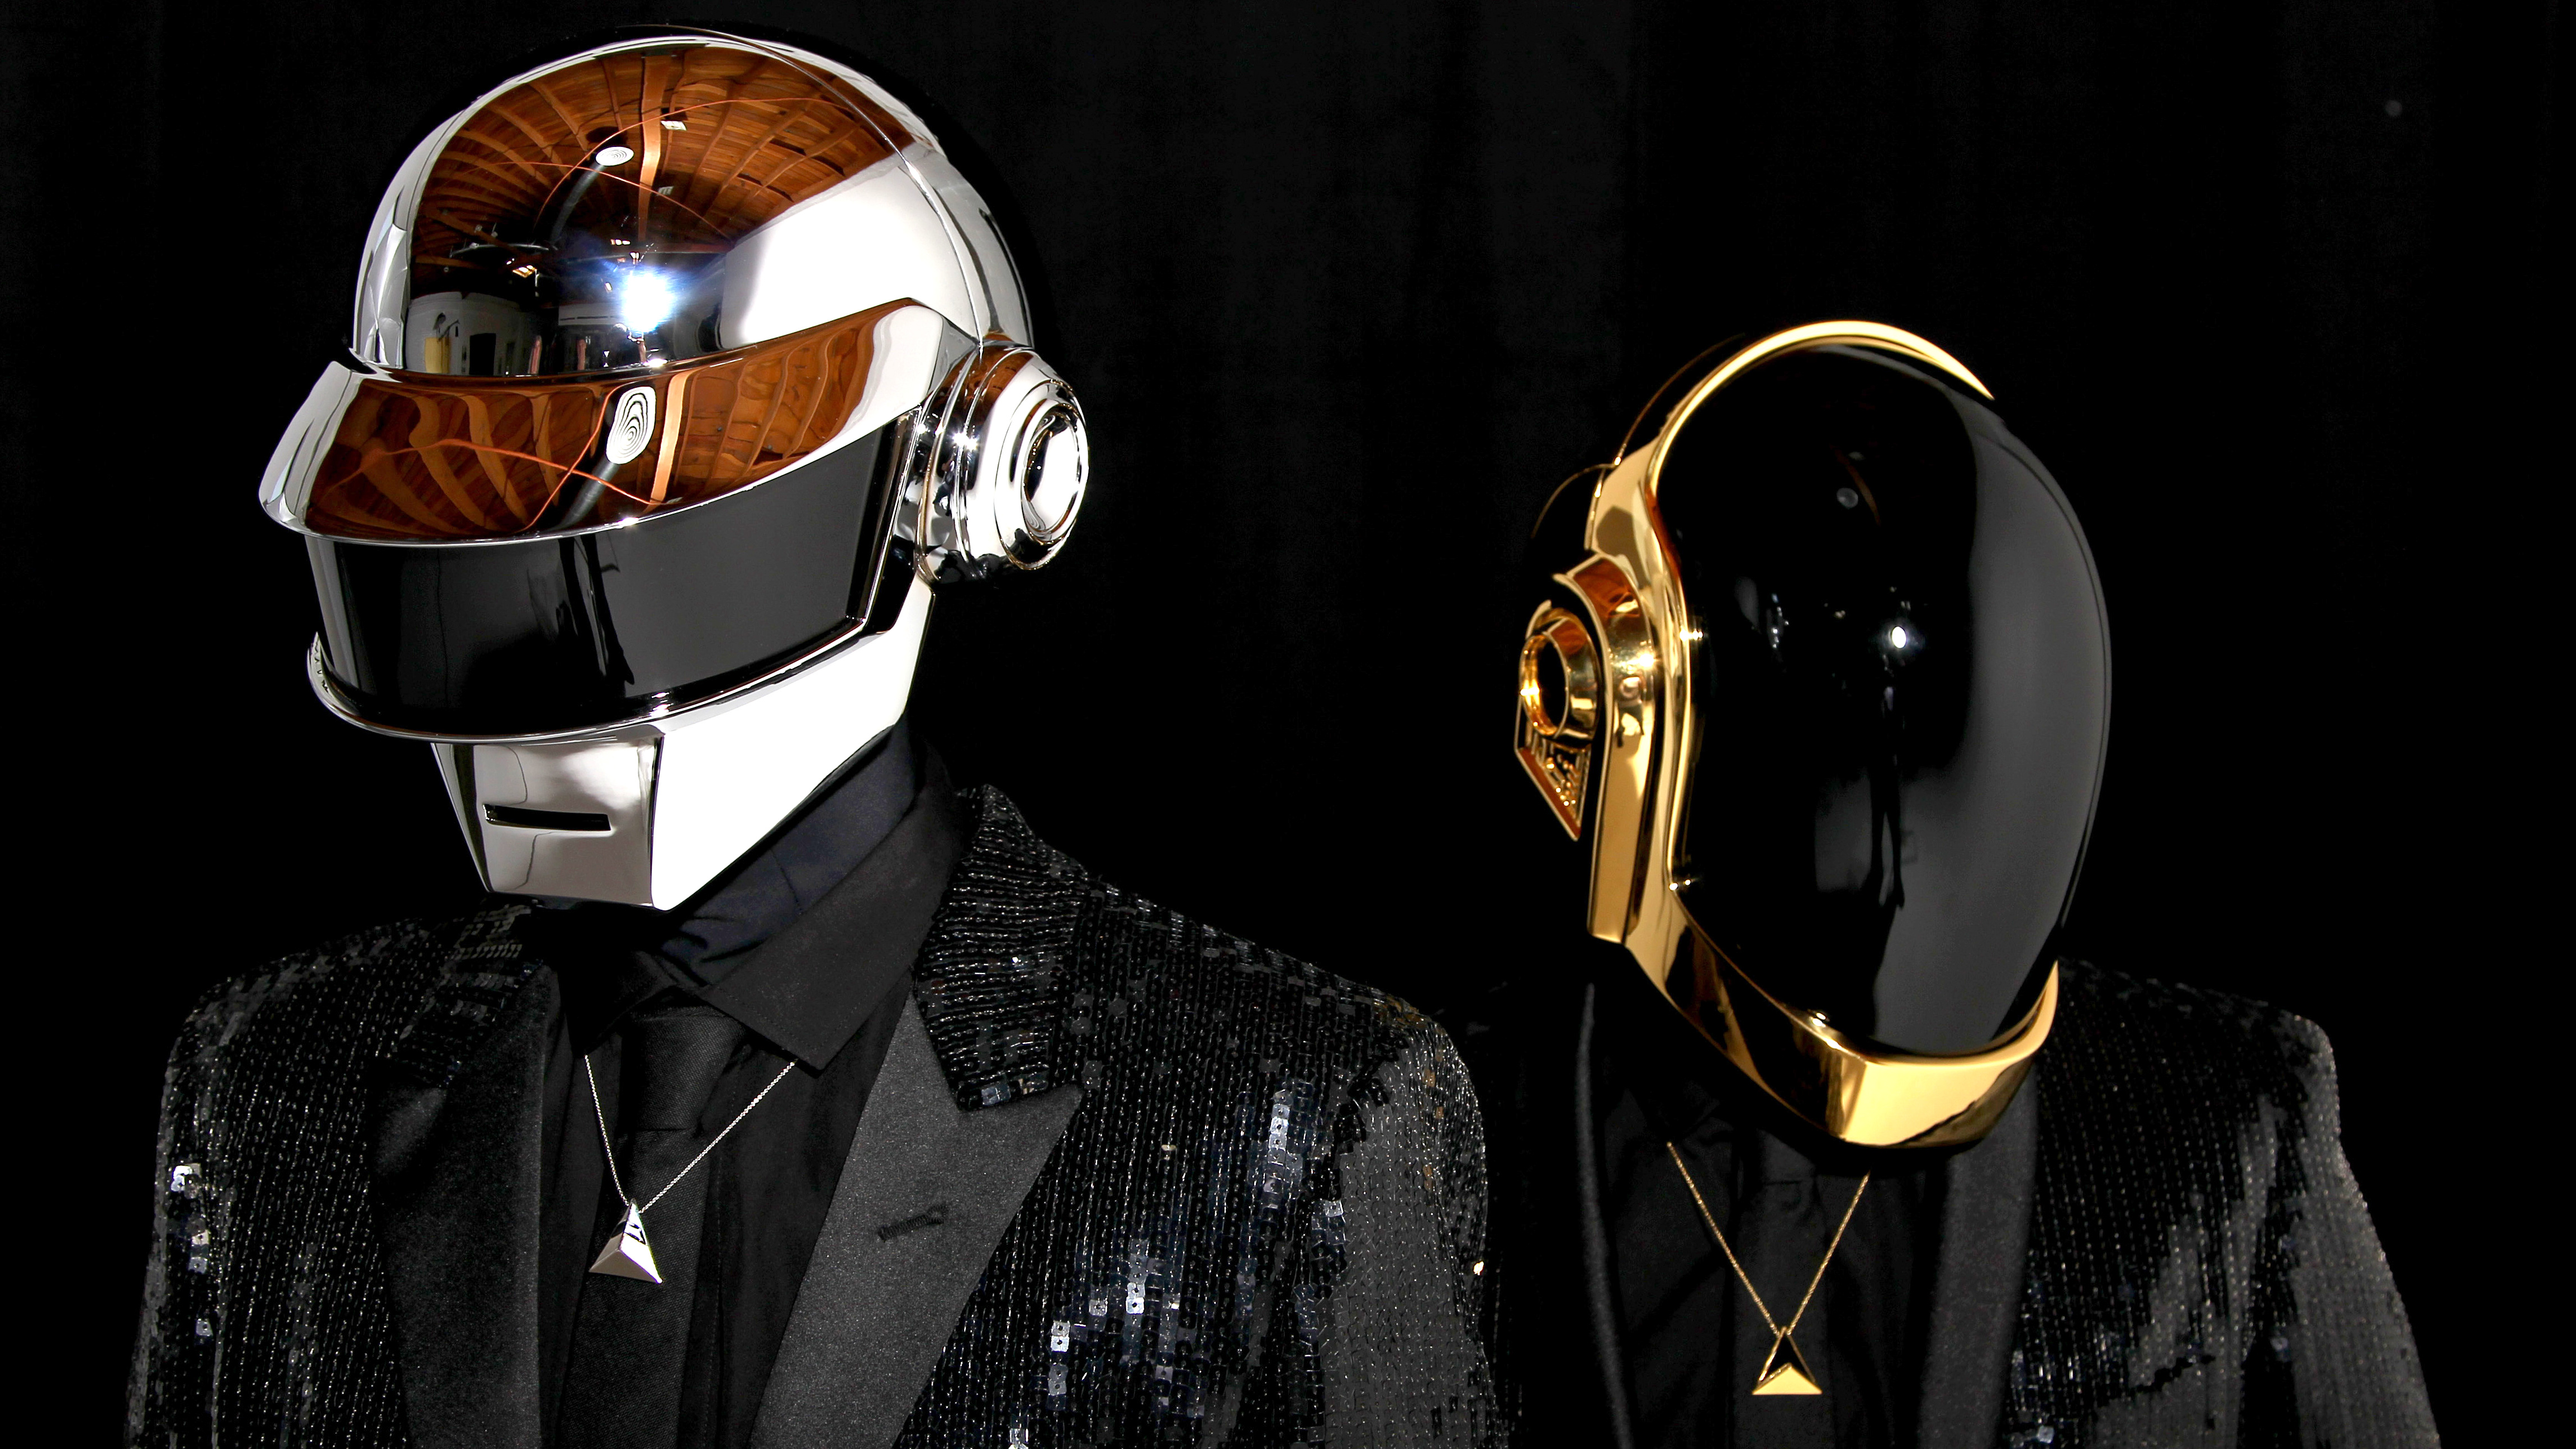 FILE - In this April 17, 2013 file photo, Thomas Bangalter, left, and Guy-Manuel de Homem-Christo, from the music group, Daft Punk, pose for a portrait in Los Angeles. Daft Punk has set another record on Spotify. The music service said Monday, May 27, 2013, that the electronic duo's new album, "Random Access Memories," had biggest number of streams in its first week in the United States. Spotify wouldn't release the number of streams, but Daft Punk beat the 8 million streams Mumford & Sons set with "Babel" last year. (Photo by Matt Sayles/Invision/AP, File)